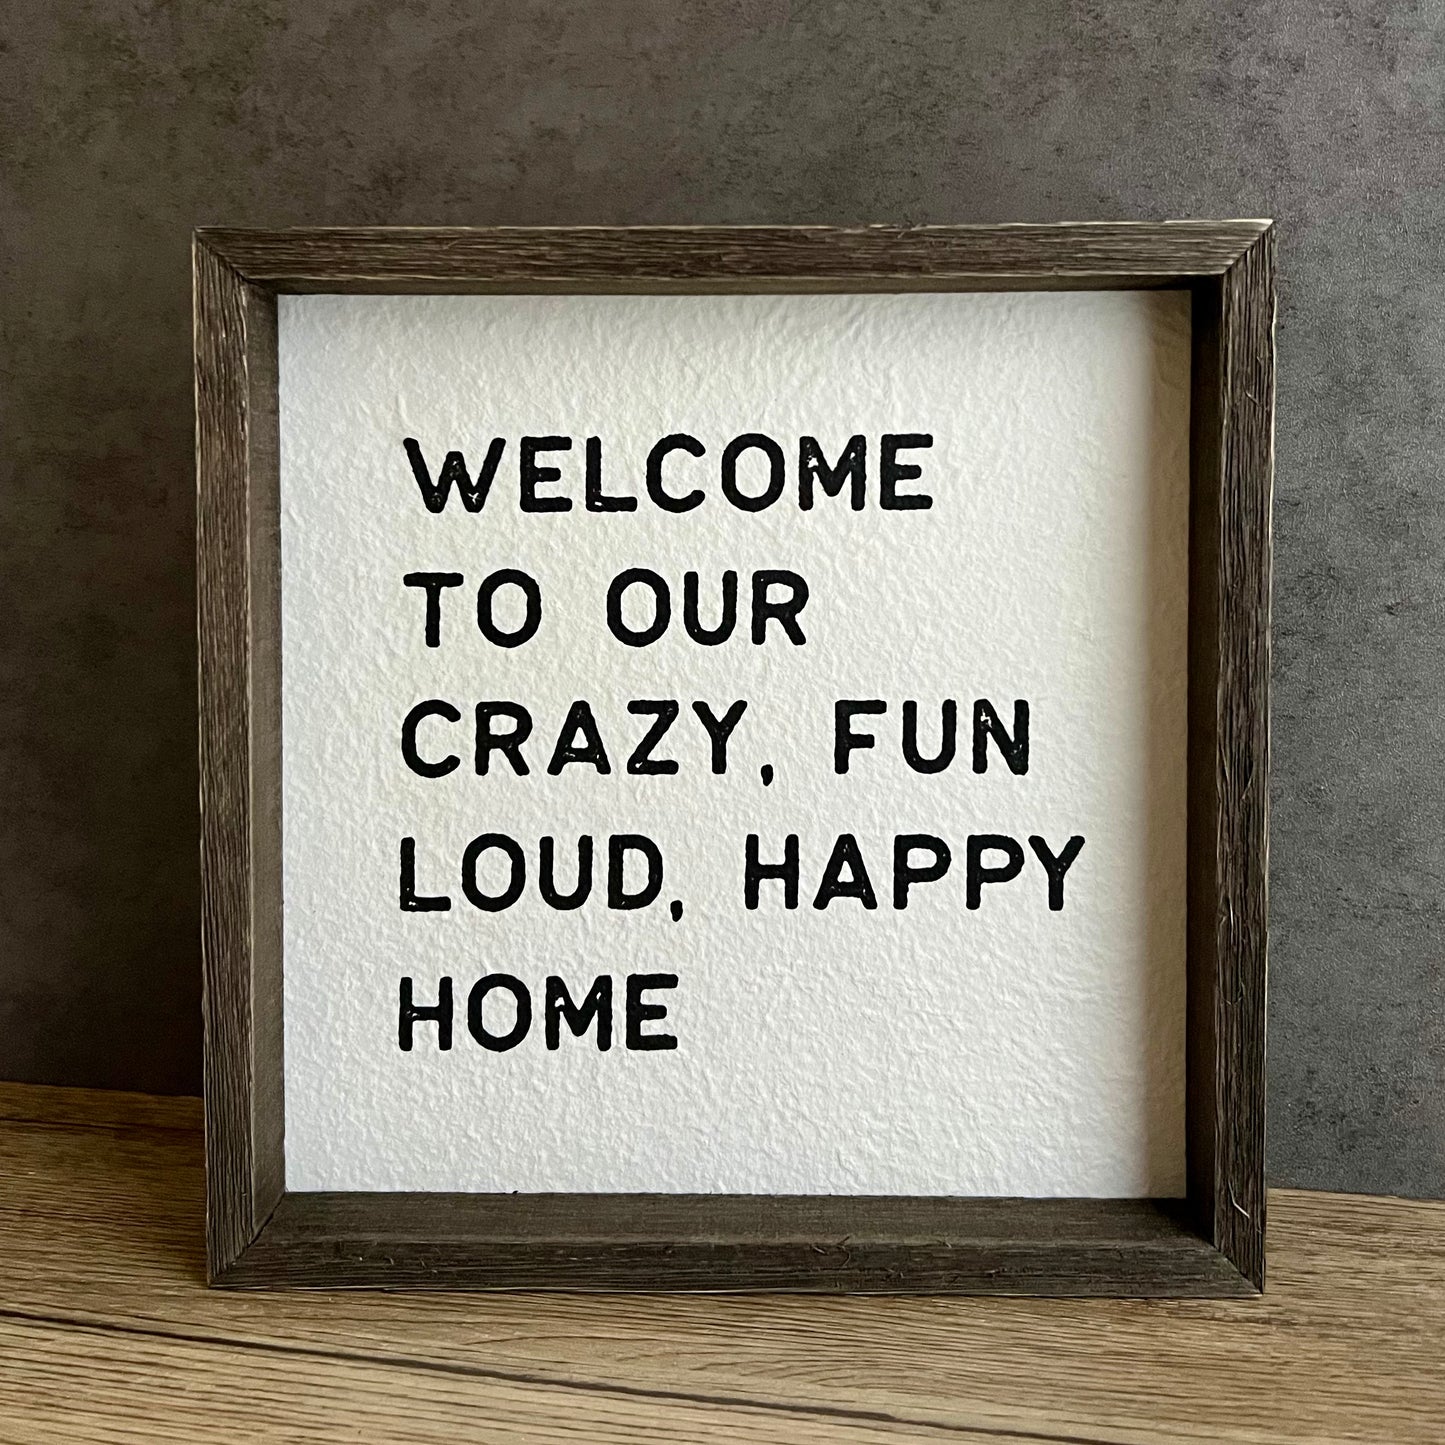 Happy Home Sign